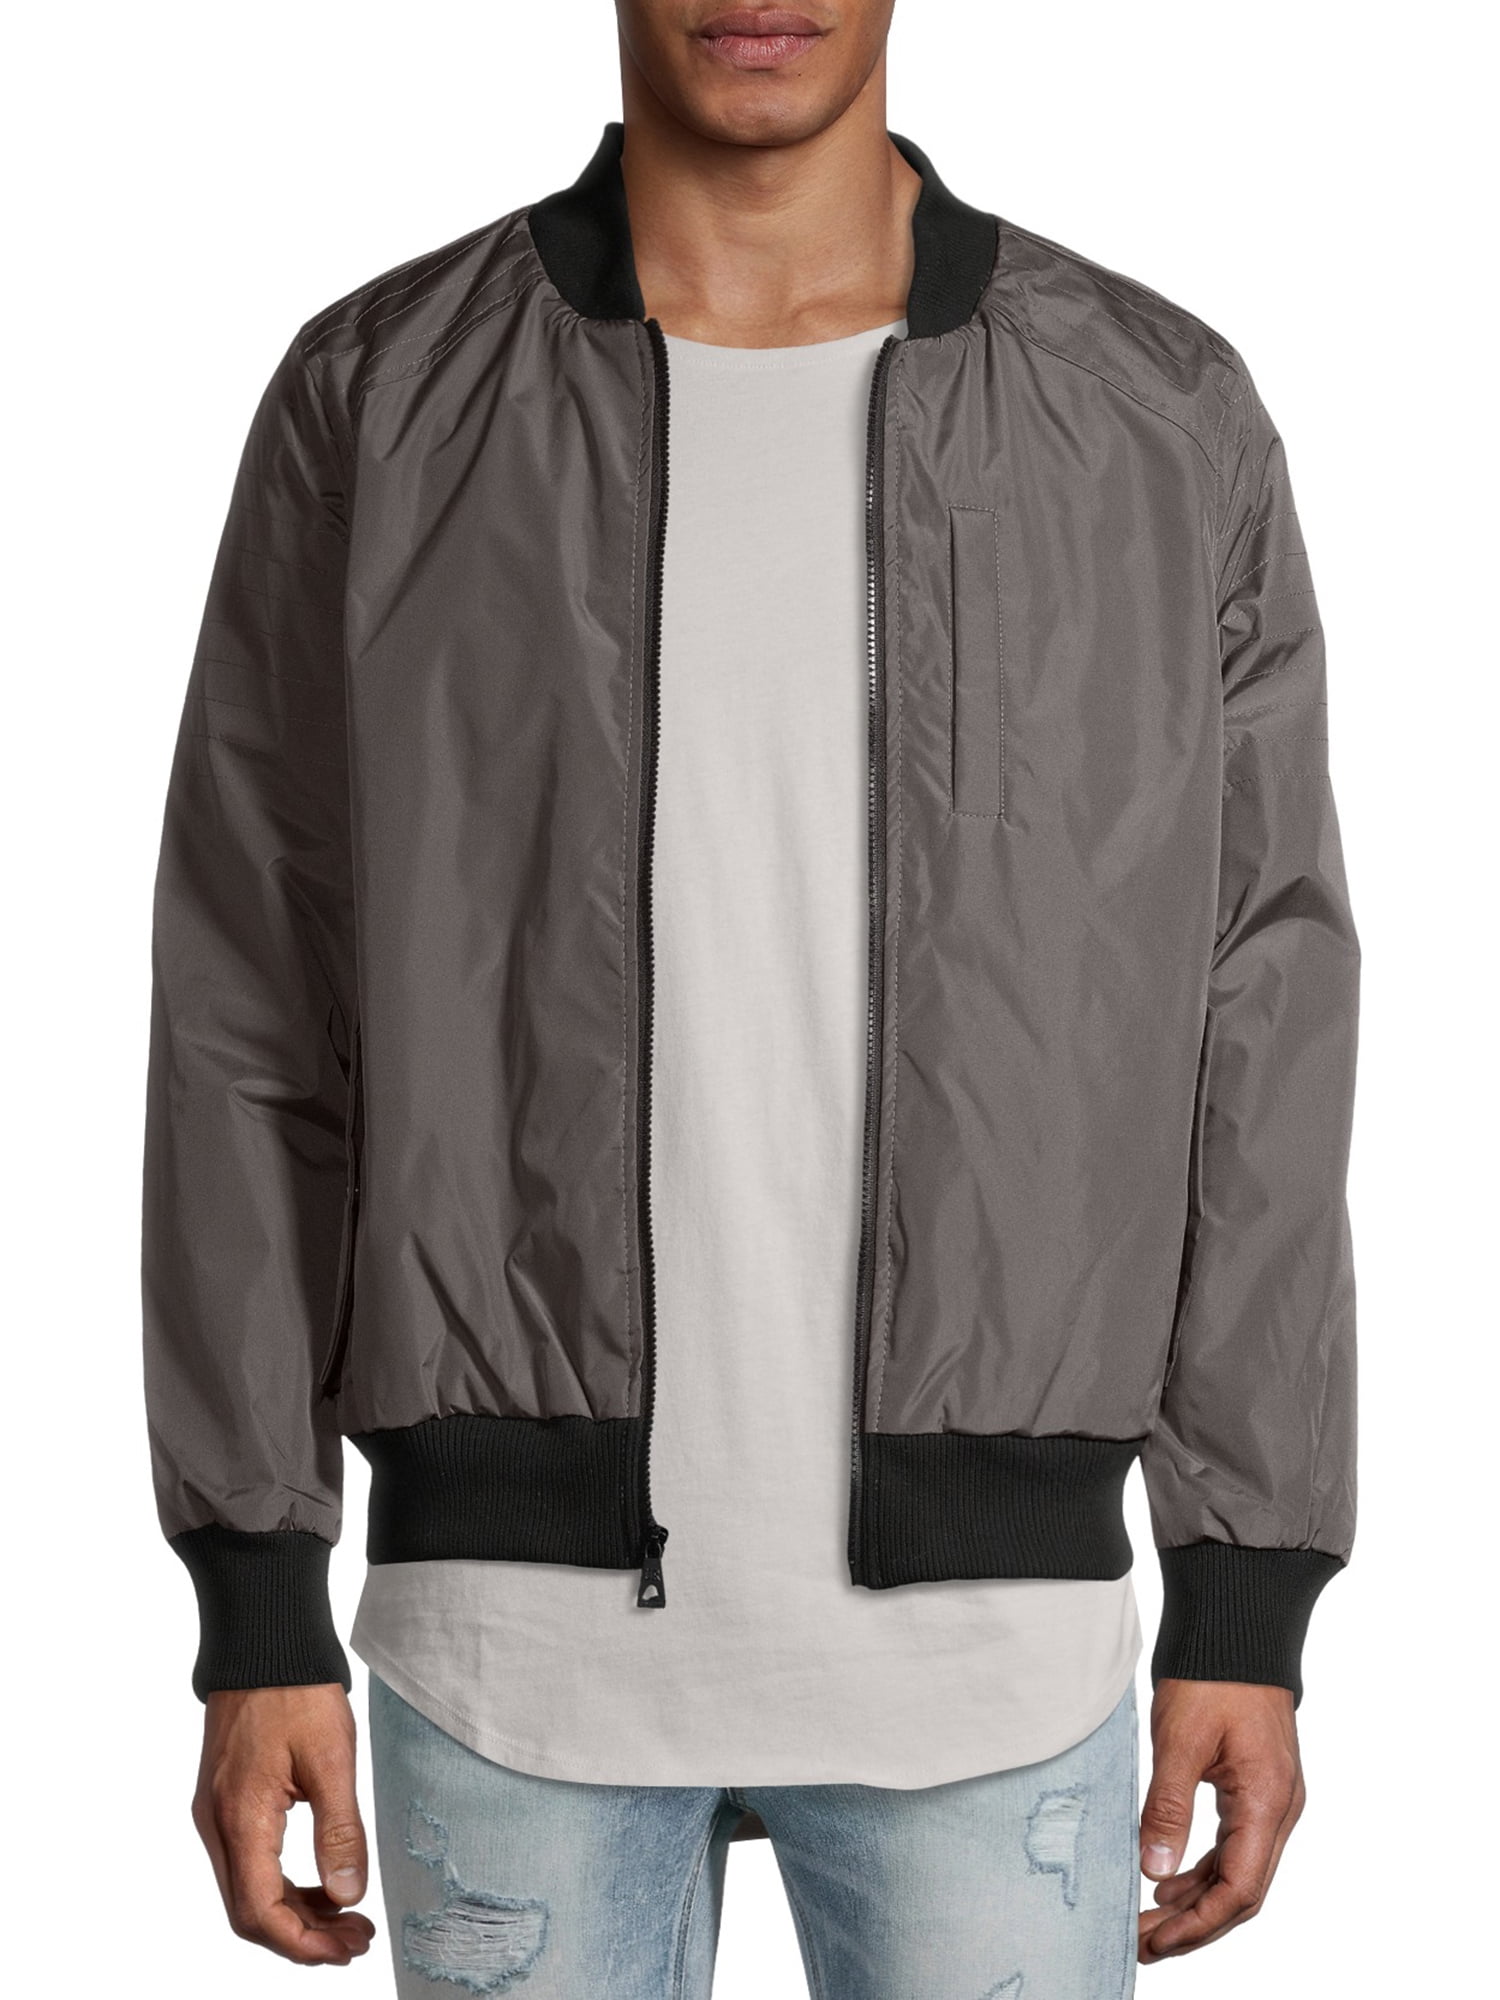 Longsleeve Jacket with Pockets and Zipper Casual Flight Jacket with Fitted Waist and Cuffs URBAN CLASSICS Mens Light Bomber Jacket